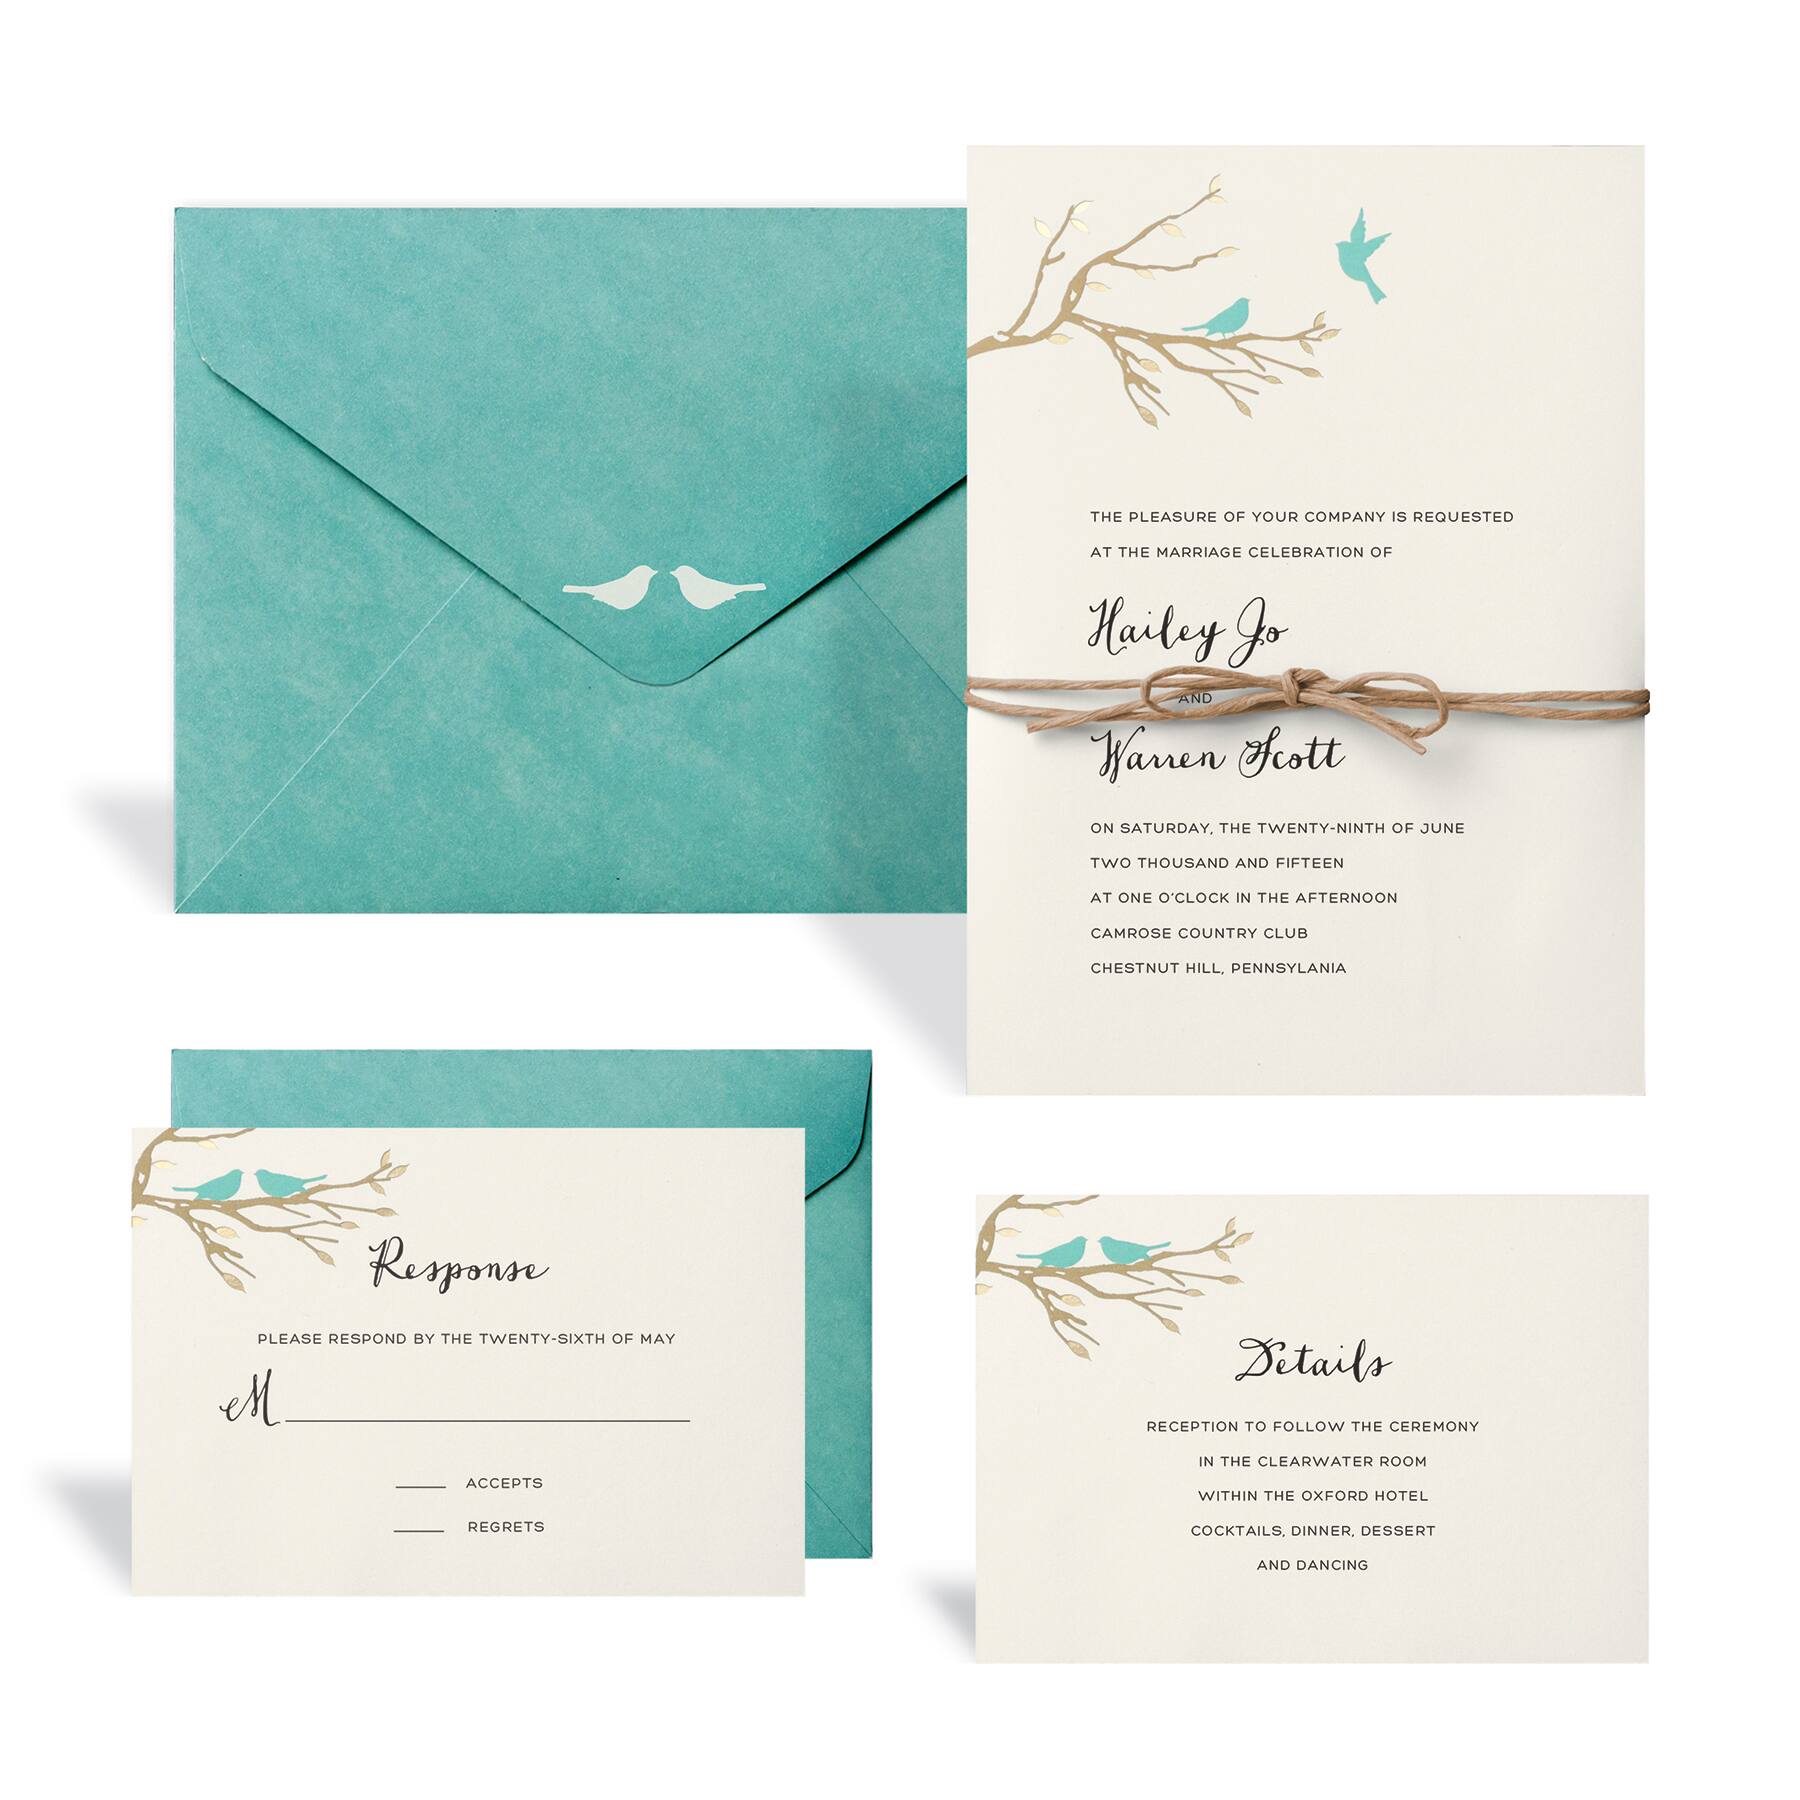 Details about   Celebrate It invitation kit wedding New Free Shipping 